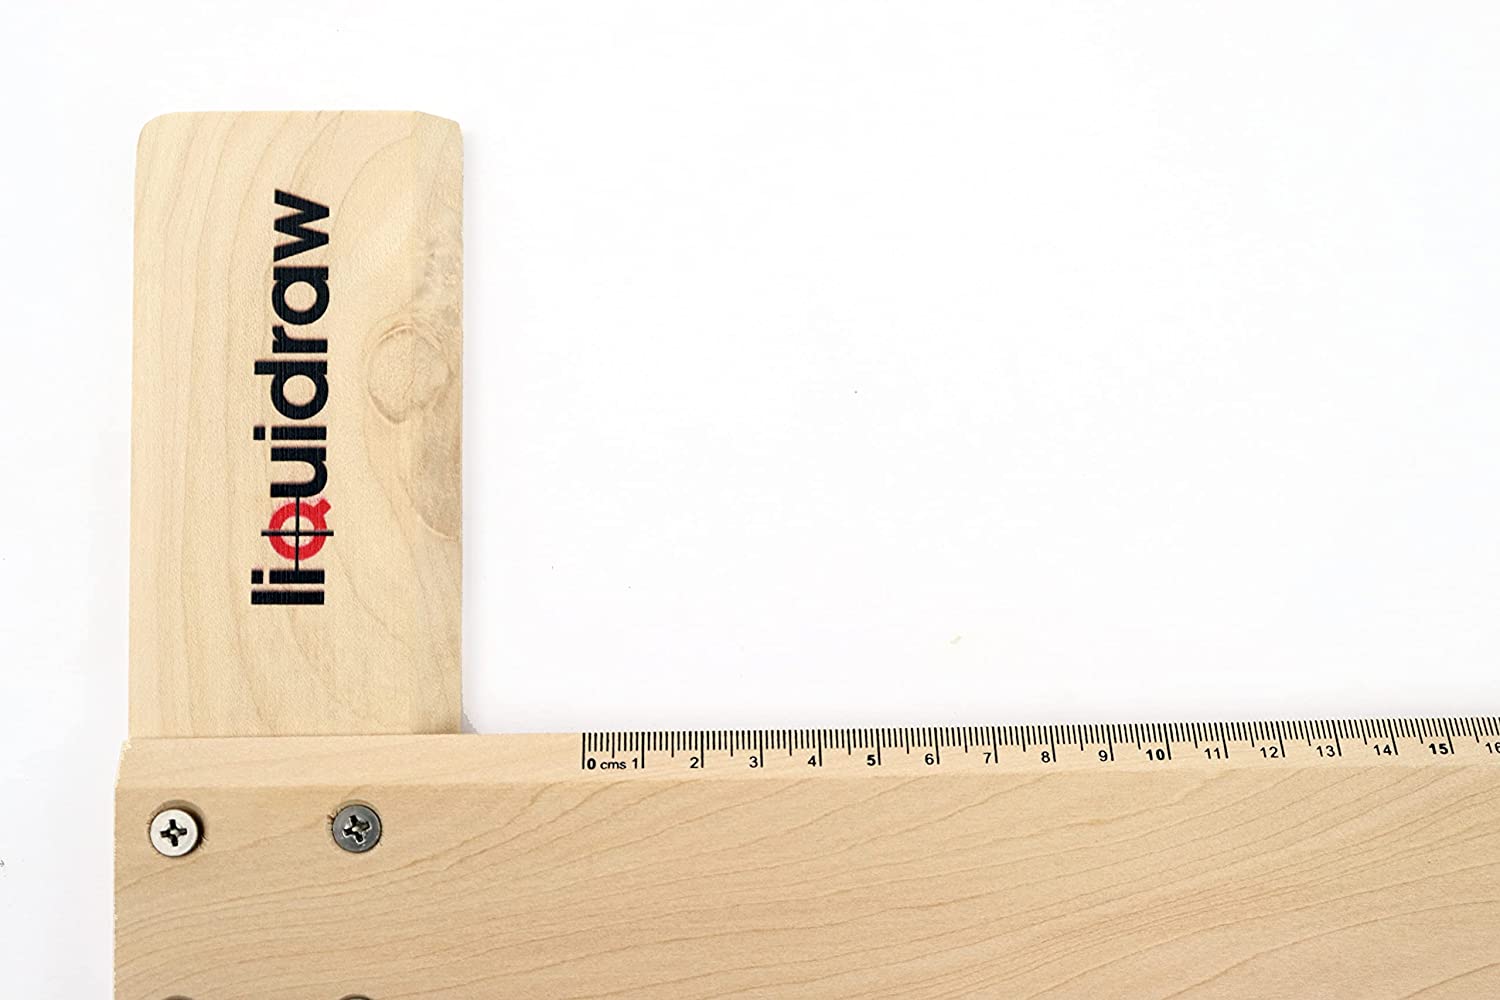 Liquidraw T Square Ruler 60cm 24 Wooden T-Square Shape Ruler For Draw